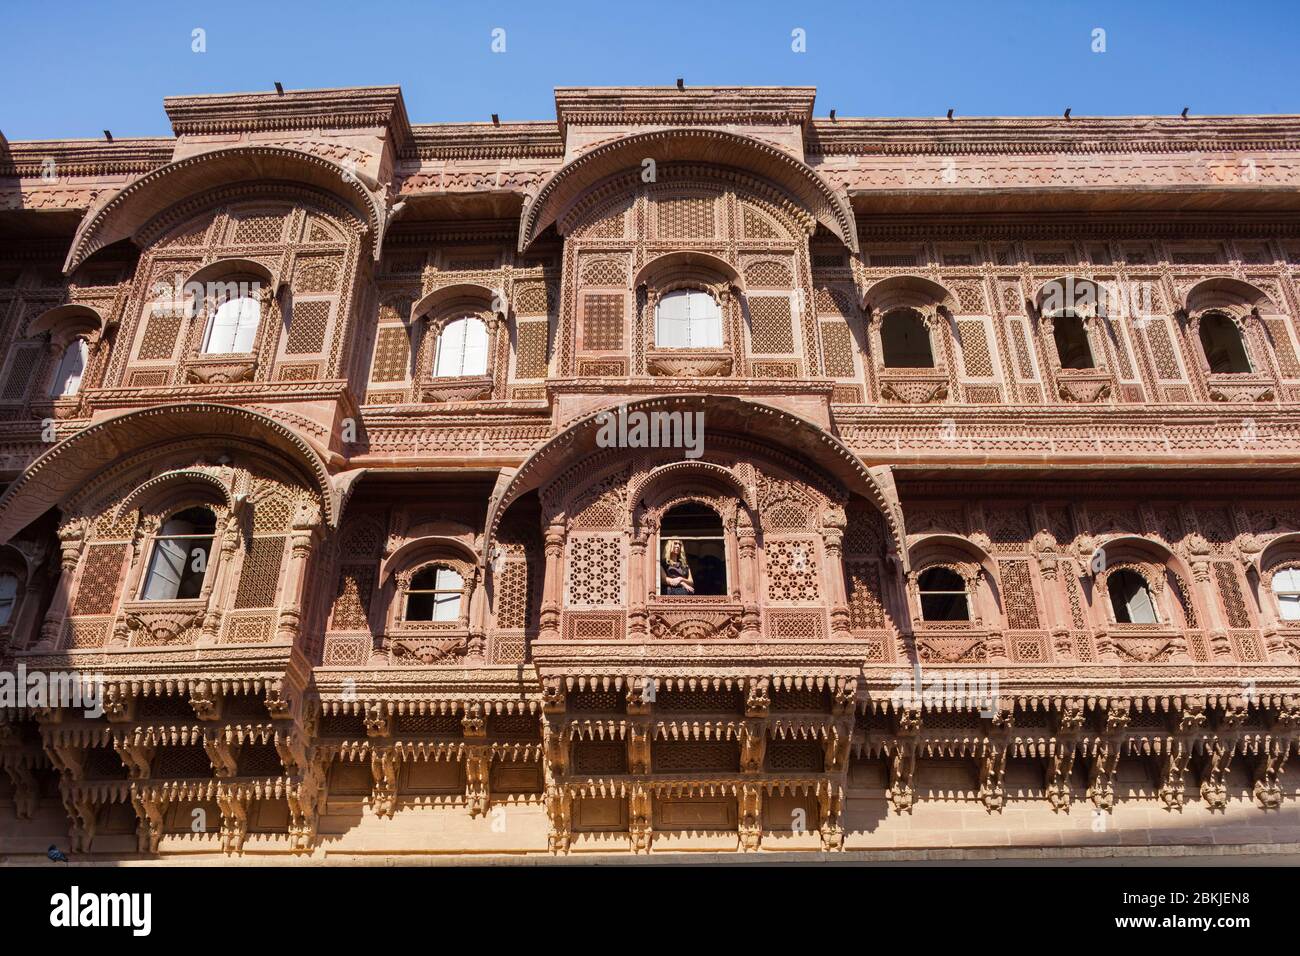 India, Rajasthan, Jodhpur, Fort Mehrangarh, western tourist looking out of the window of a large carved facade Stock Photo